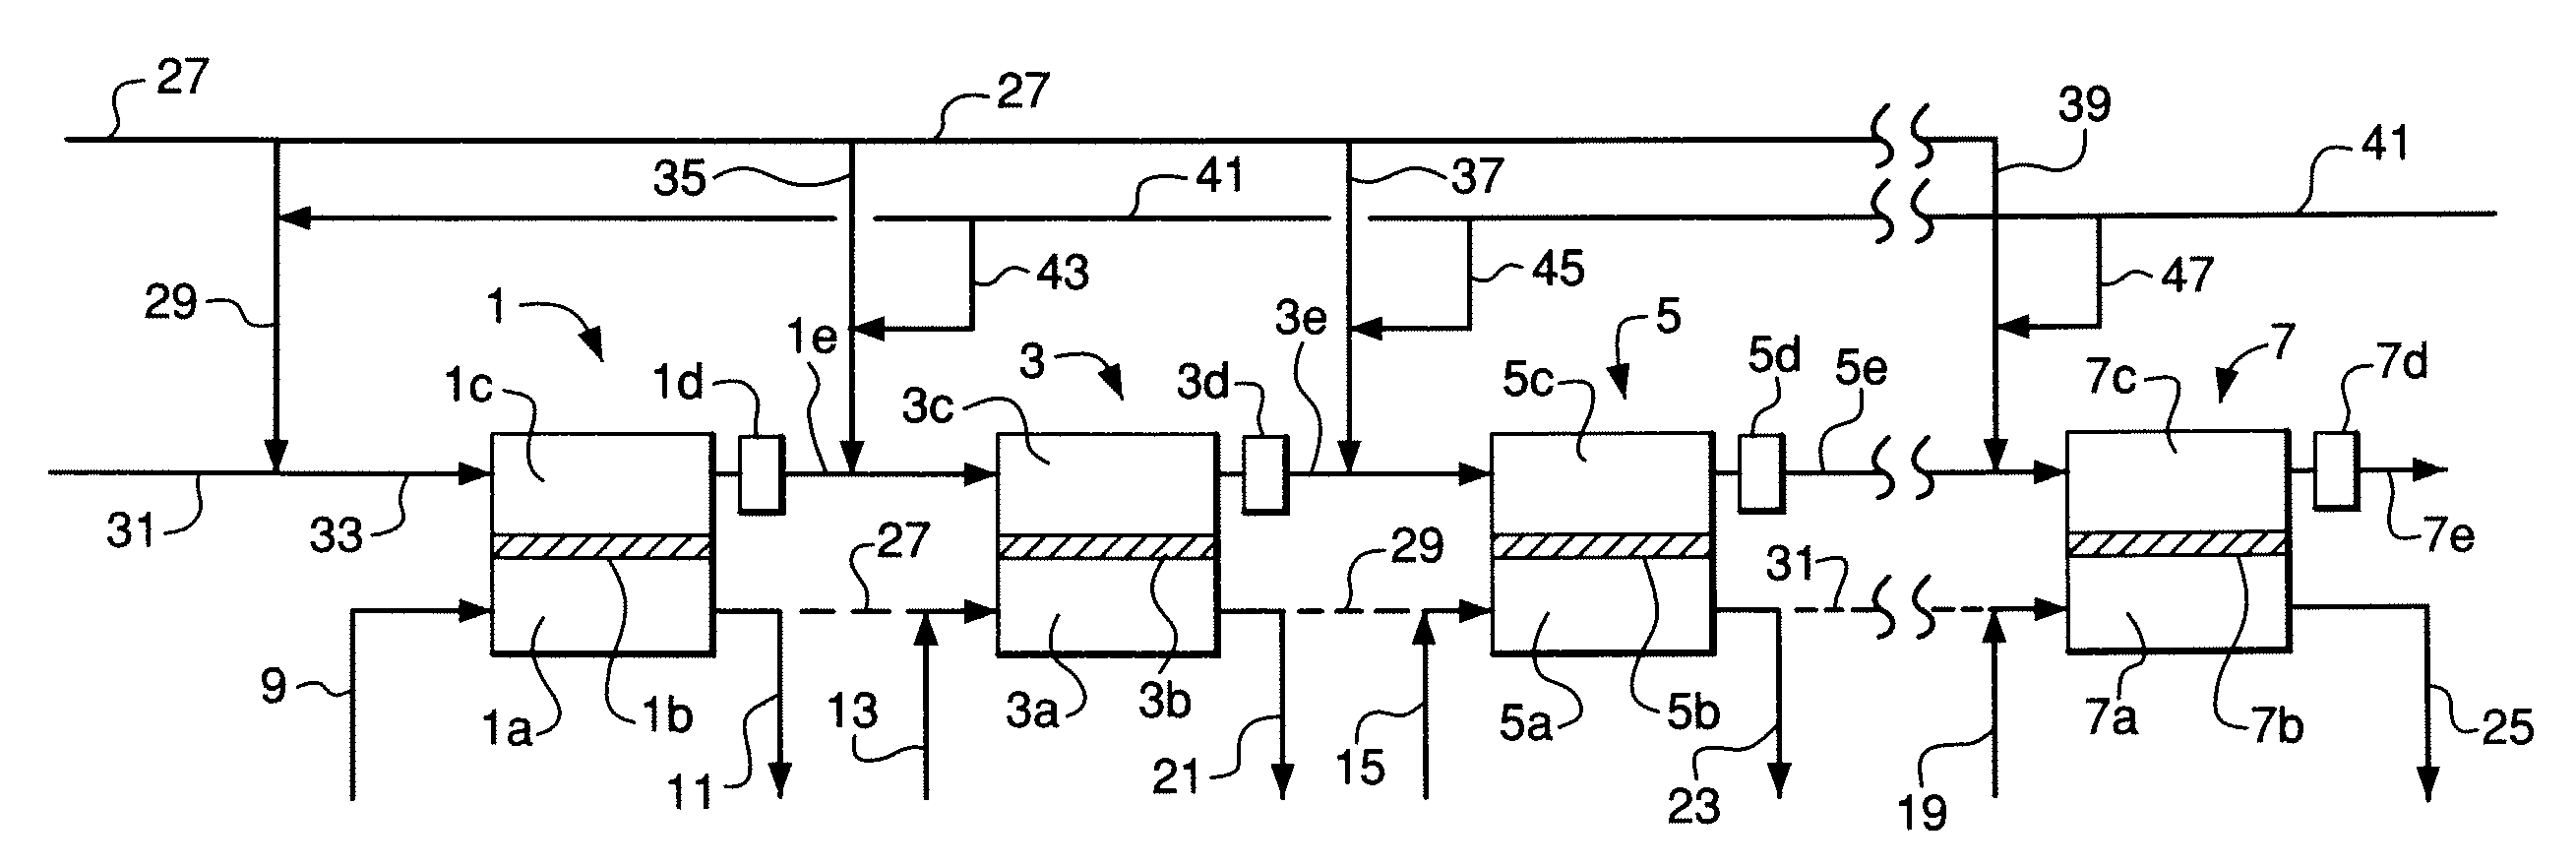 Staged Membrane Oxidation Reactor System